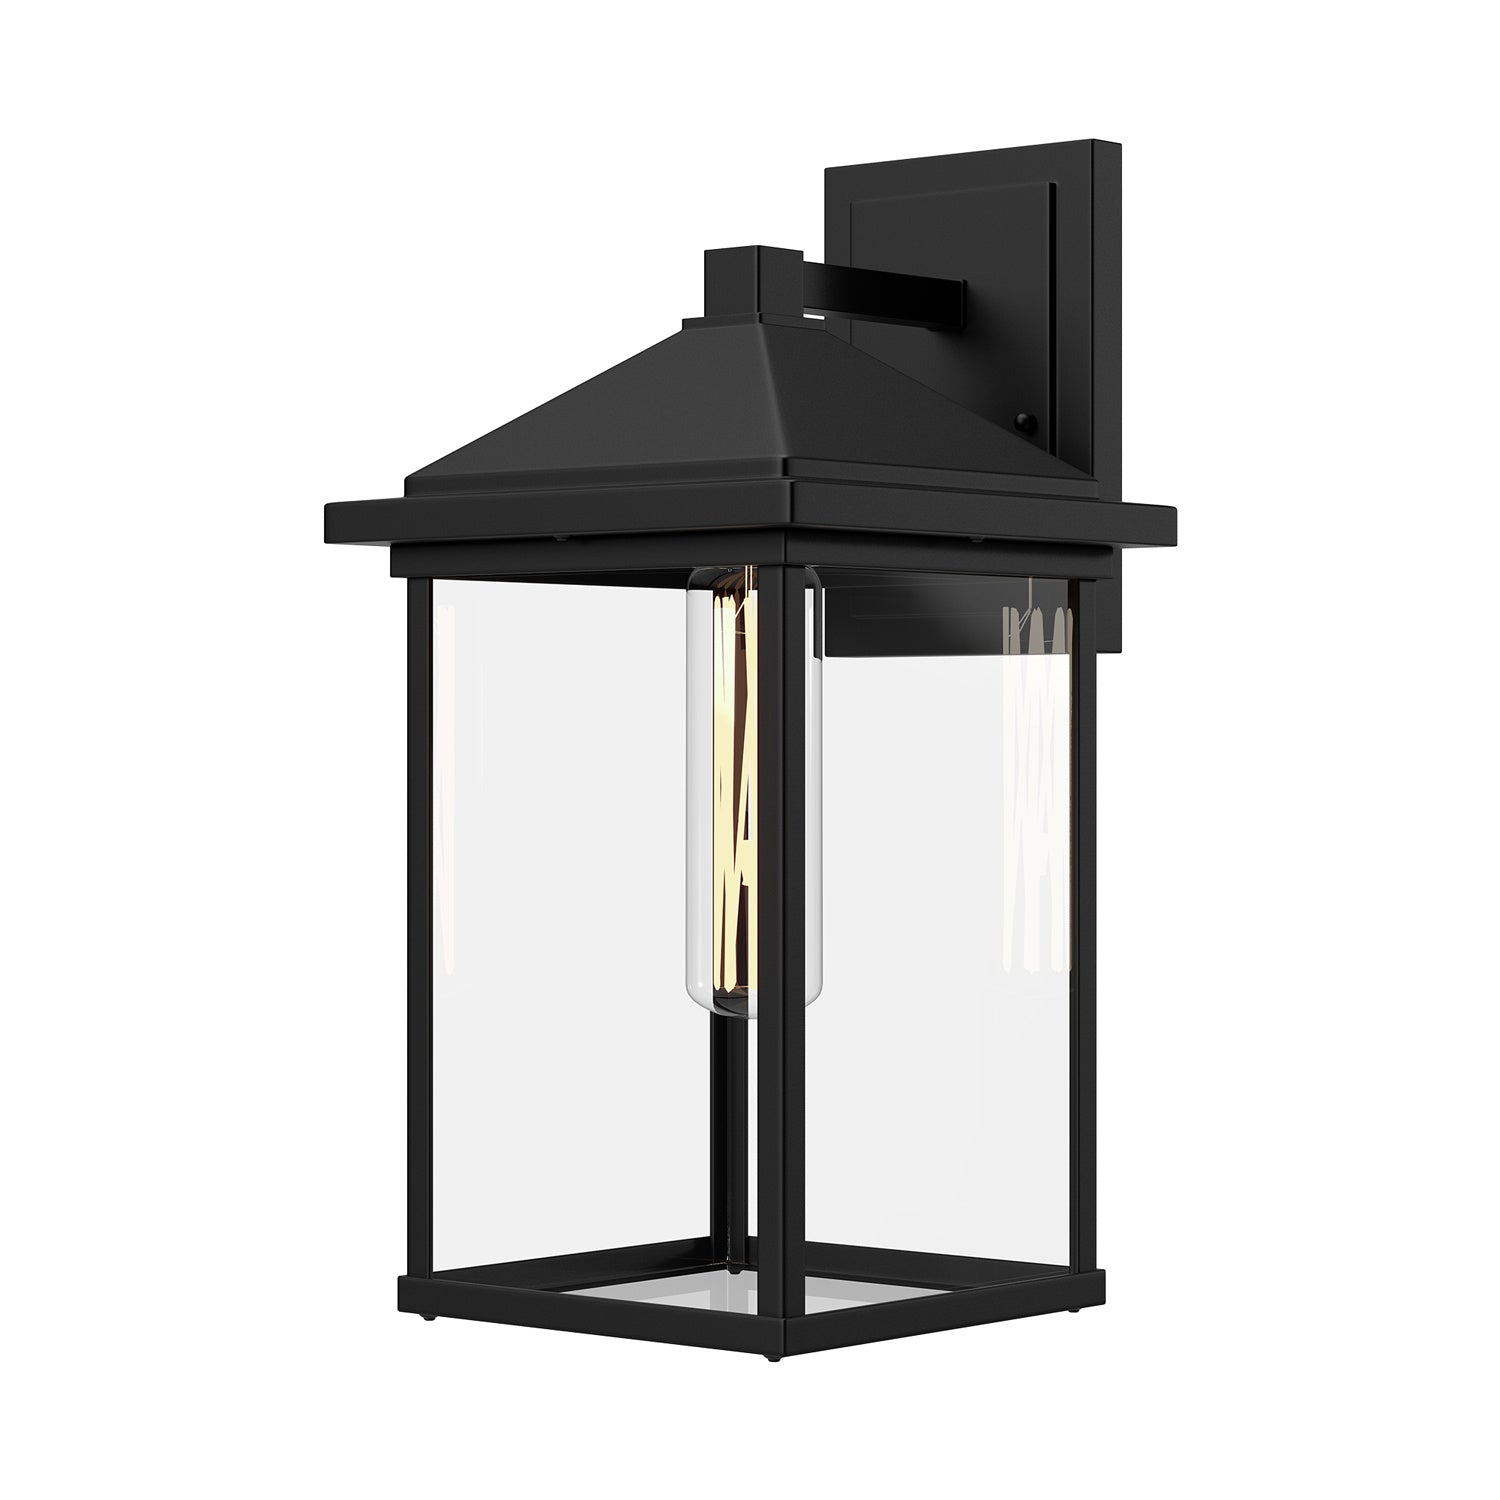 Alora - EW552007BKCL - One Light Exterior Wall Mount - Larchmont - Clear Glass/Textured Black